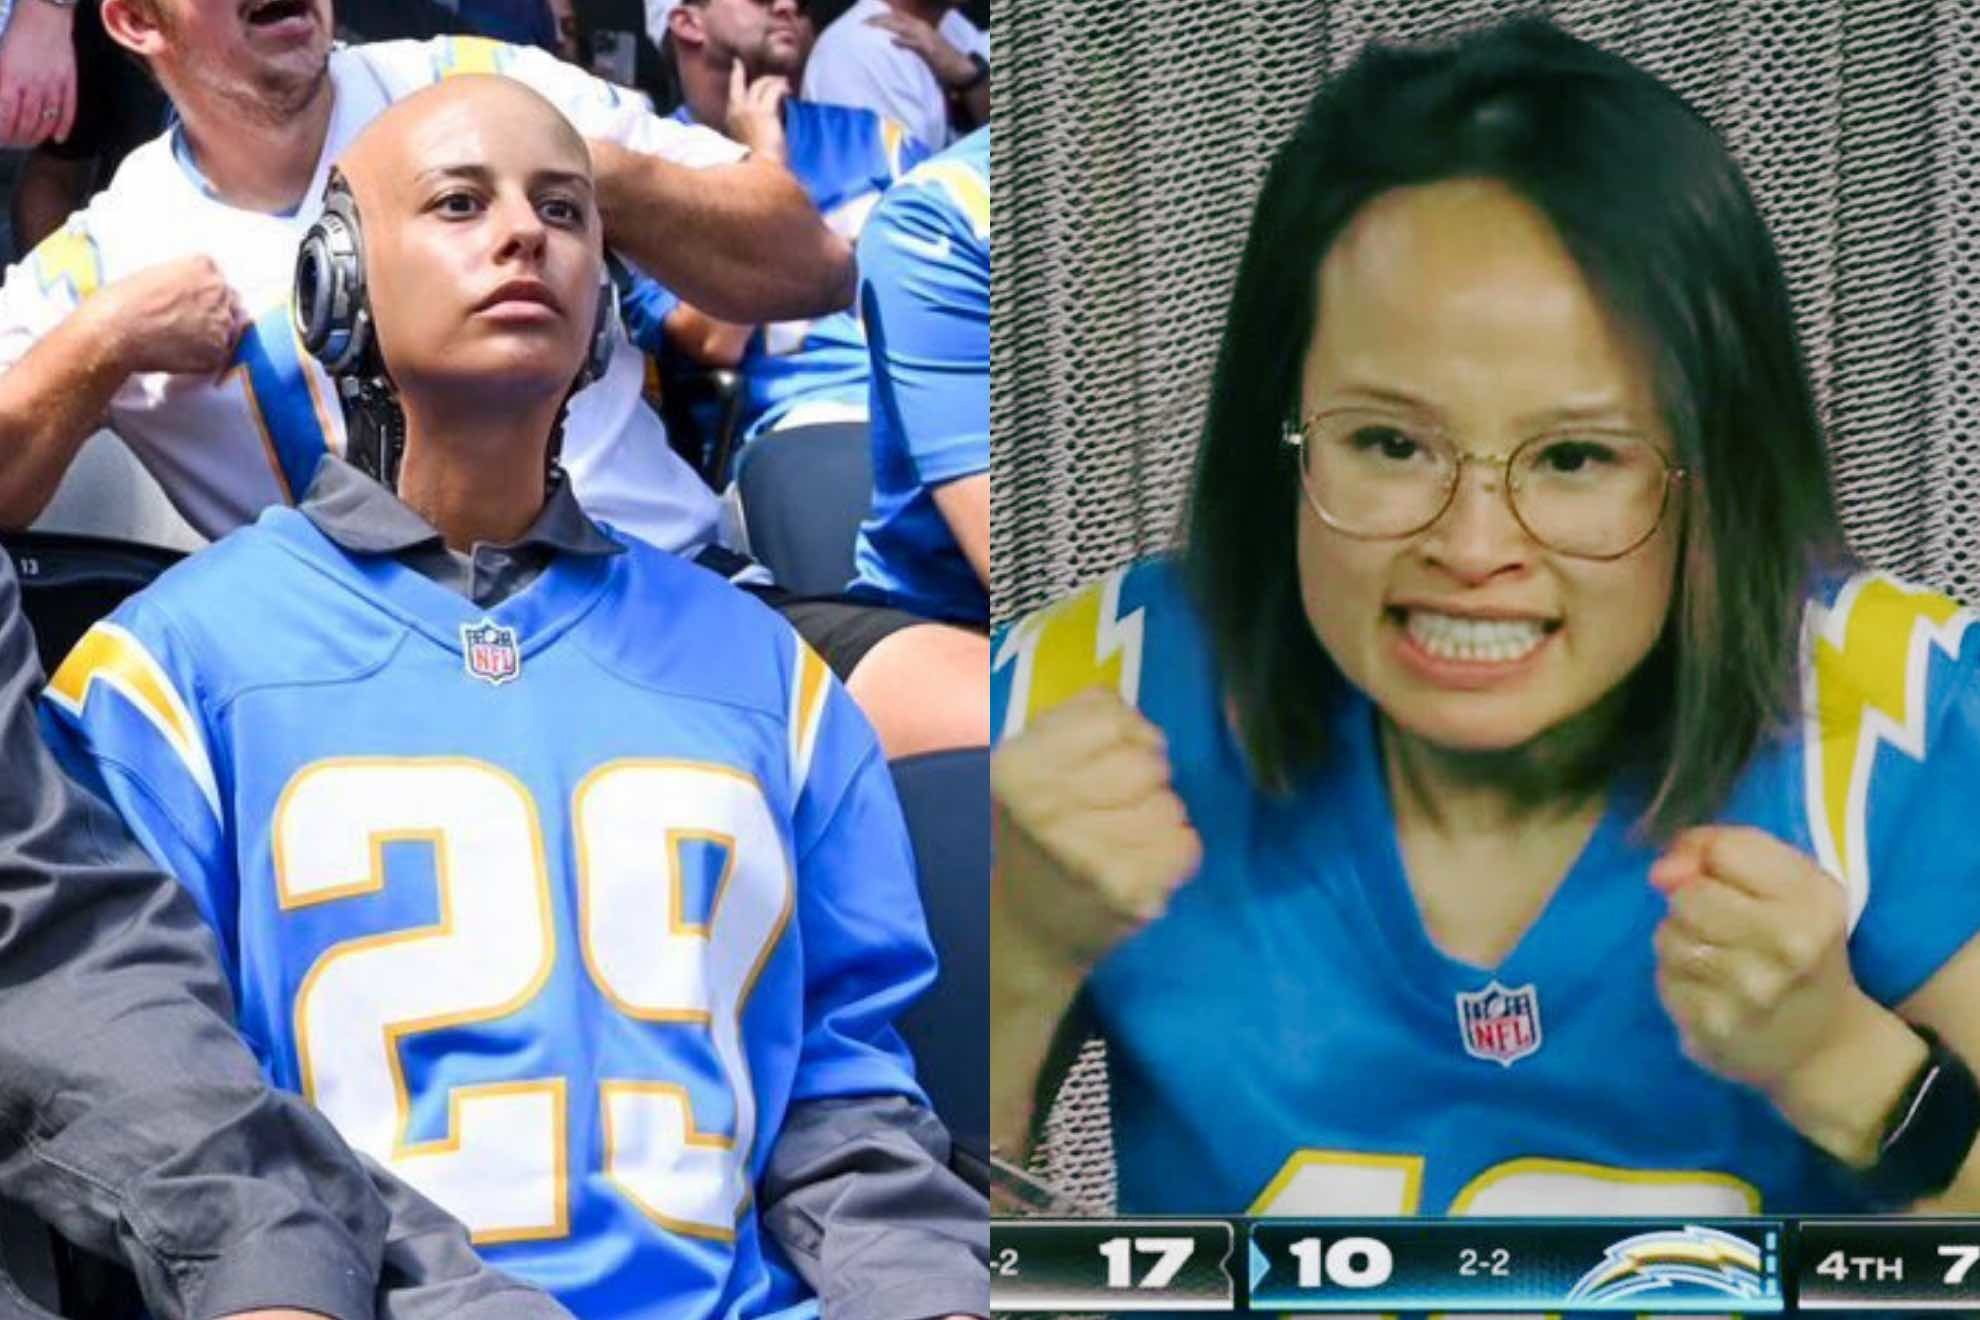 Fans joked that this Chargers fan could be an AI robot